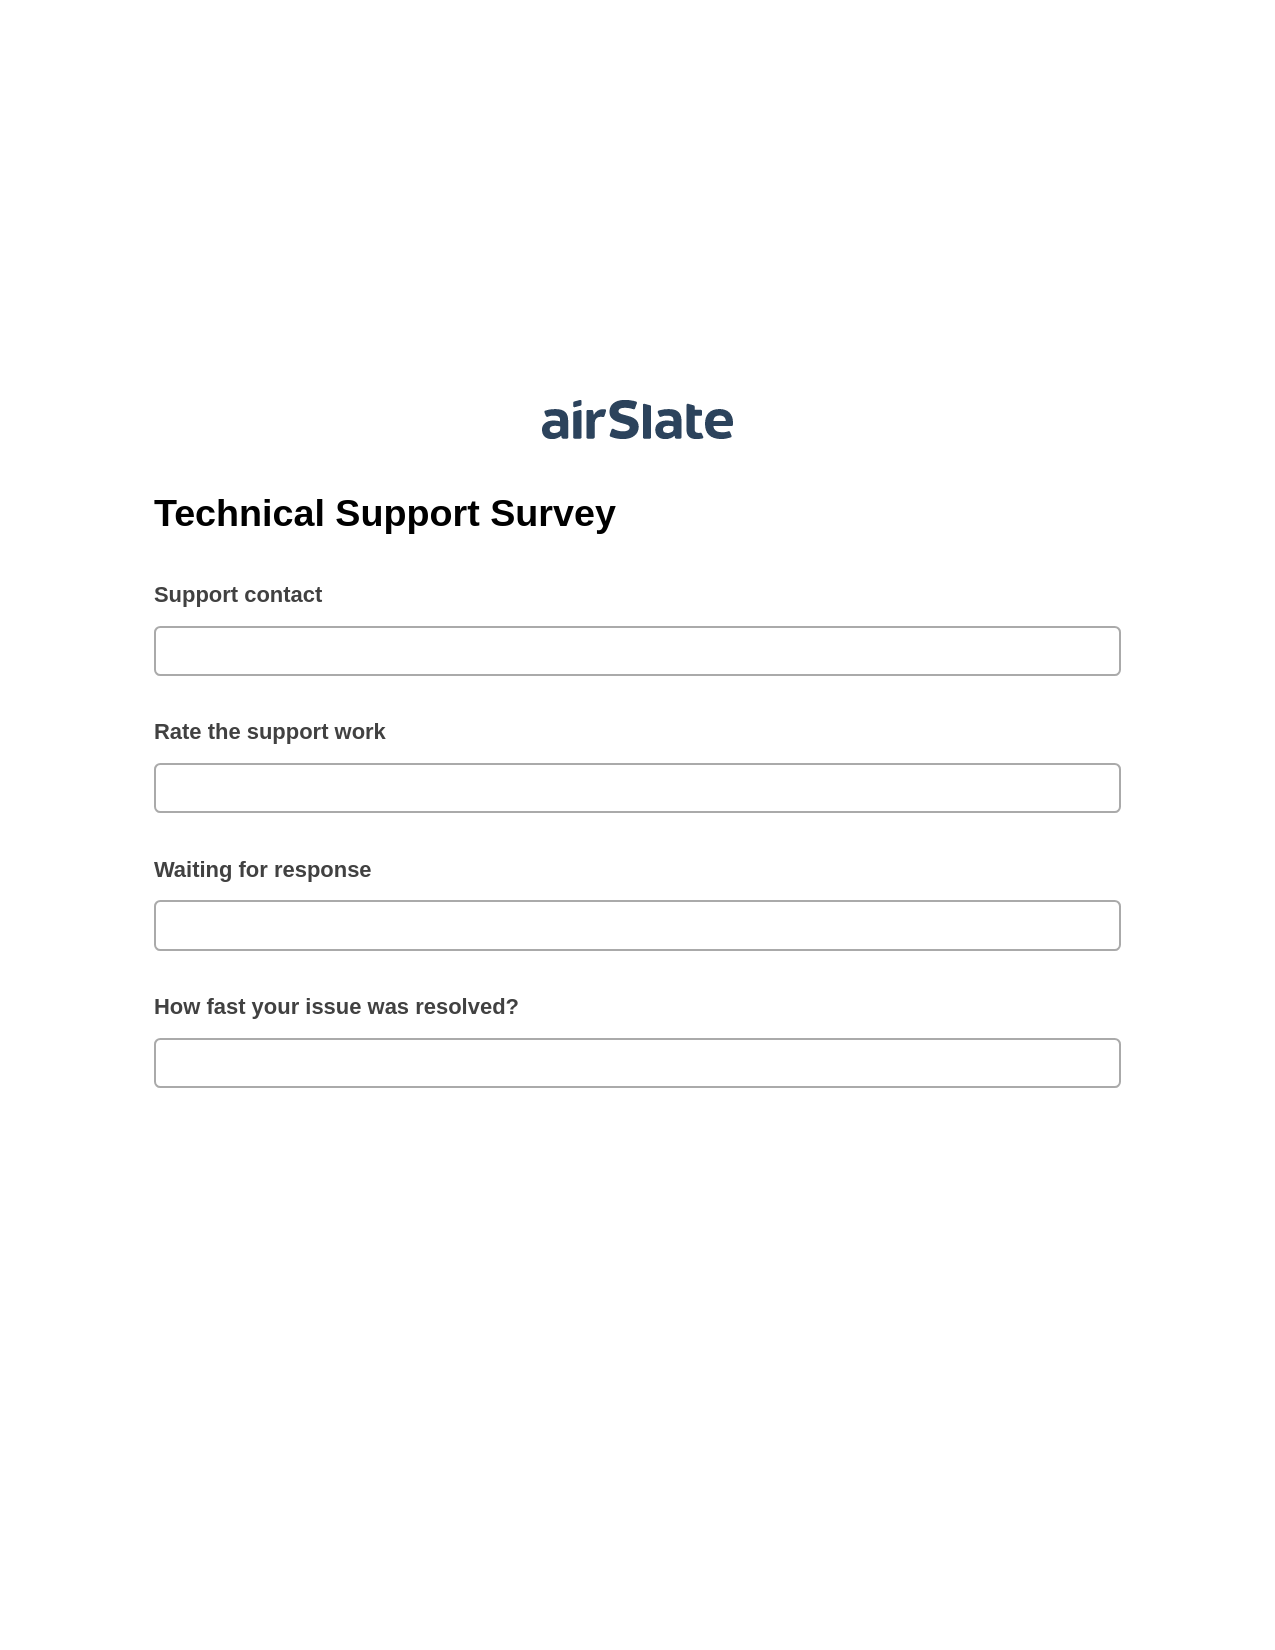 Technical Support Survey Pre-fill from Salesforce Records Bot, Webhook Bot, Archive to Google Drive Bot